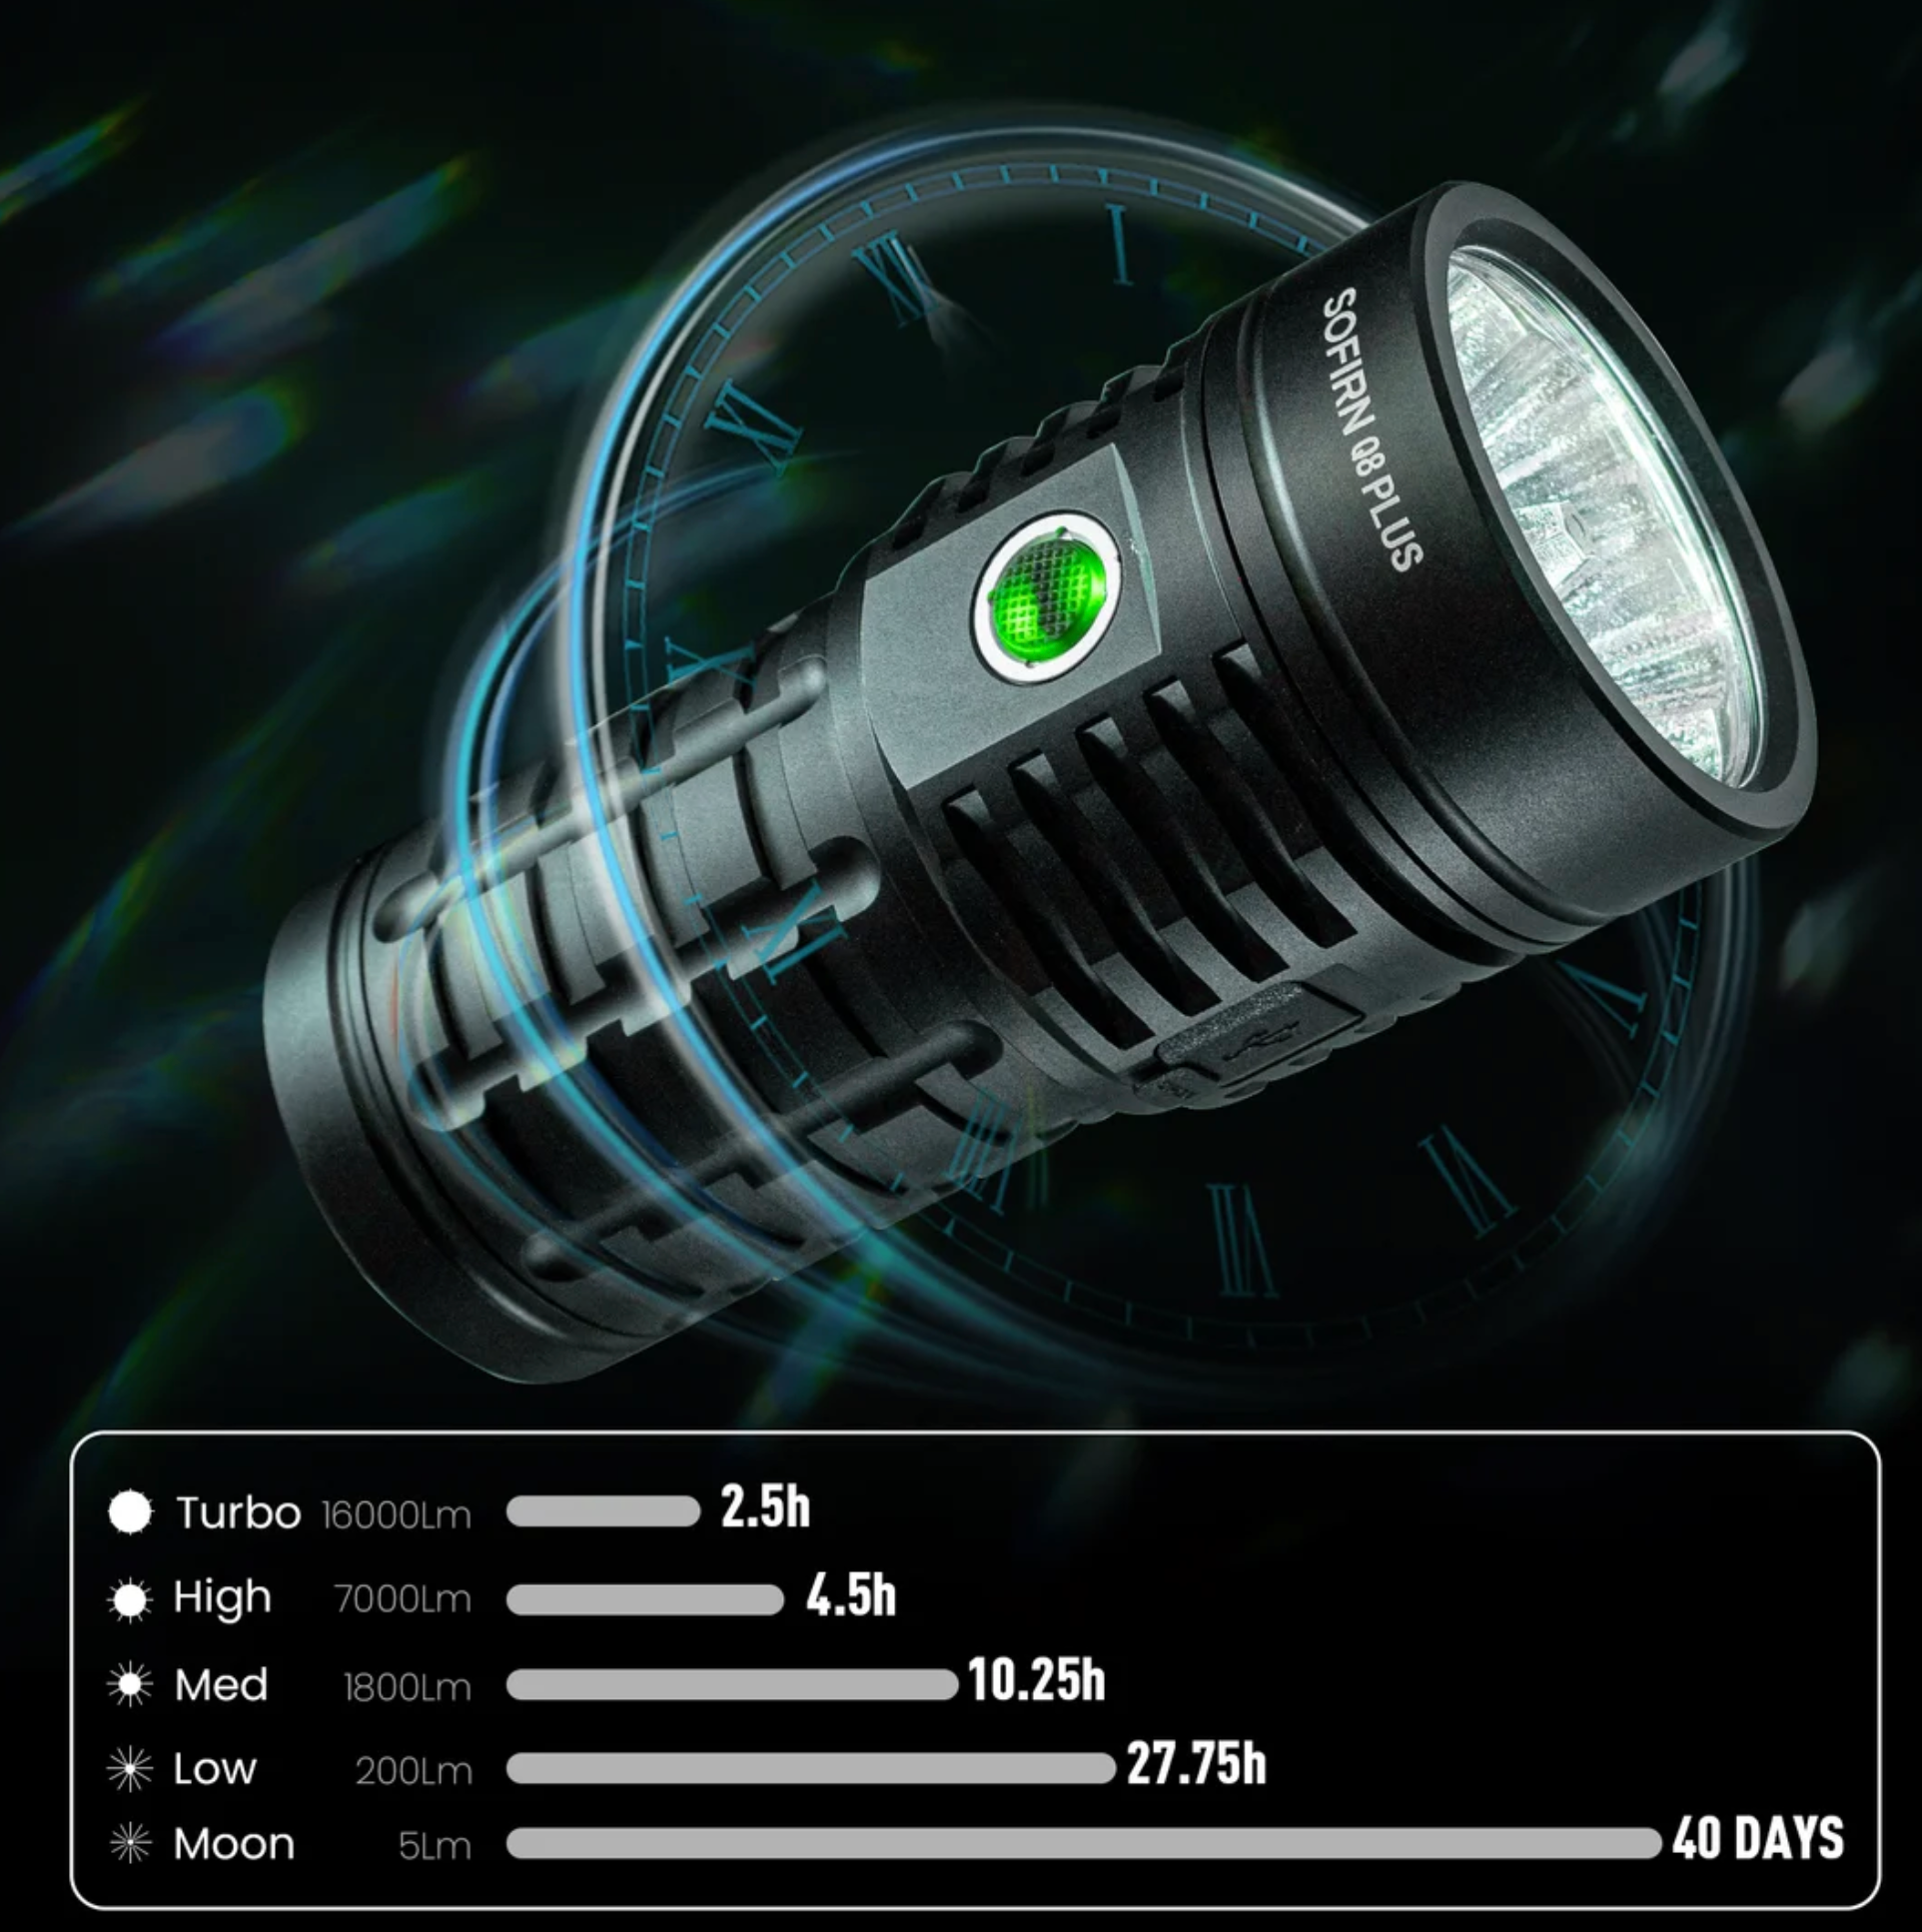 Sofirn Q8 Pro Powerful Flashlight with Anduril 2 UI【Ship From USA】